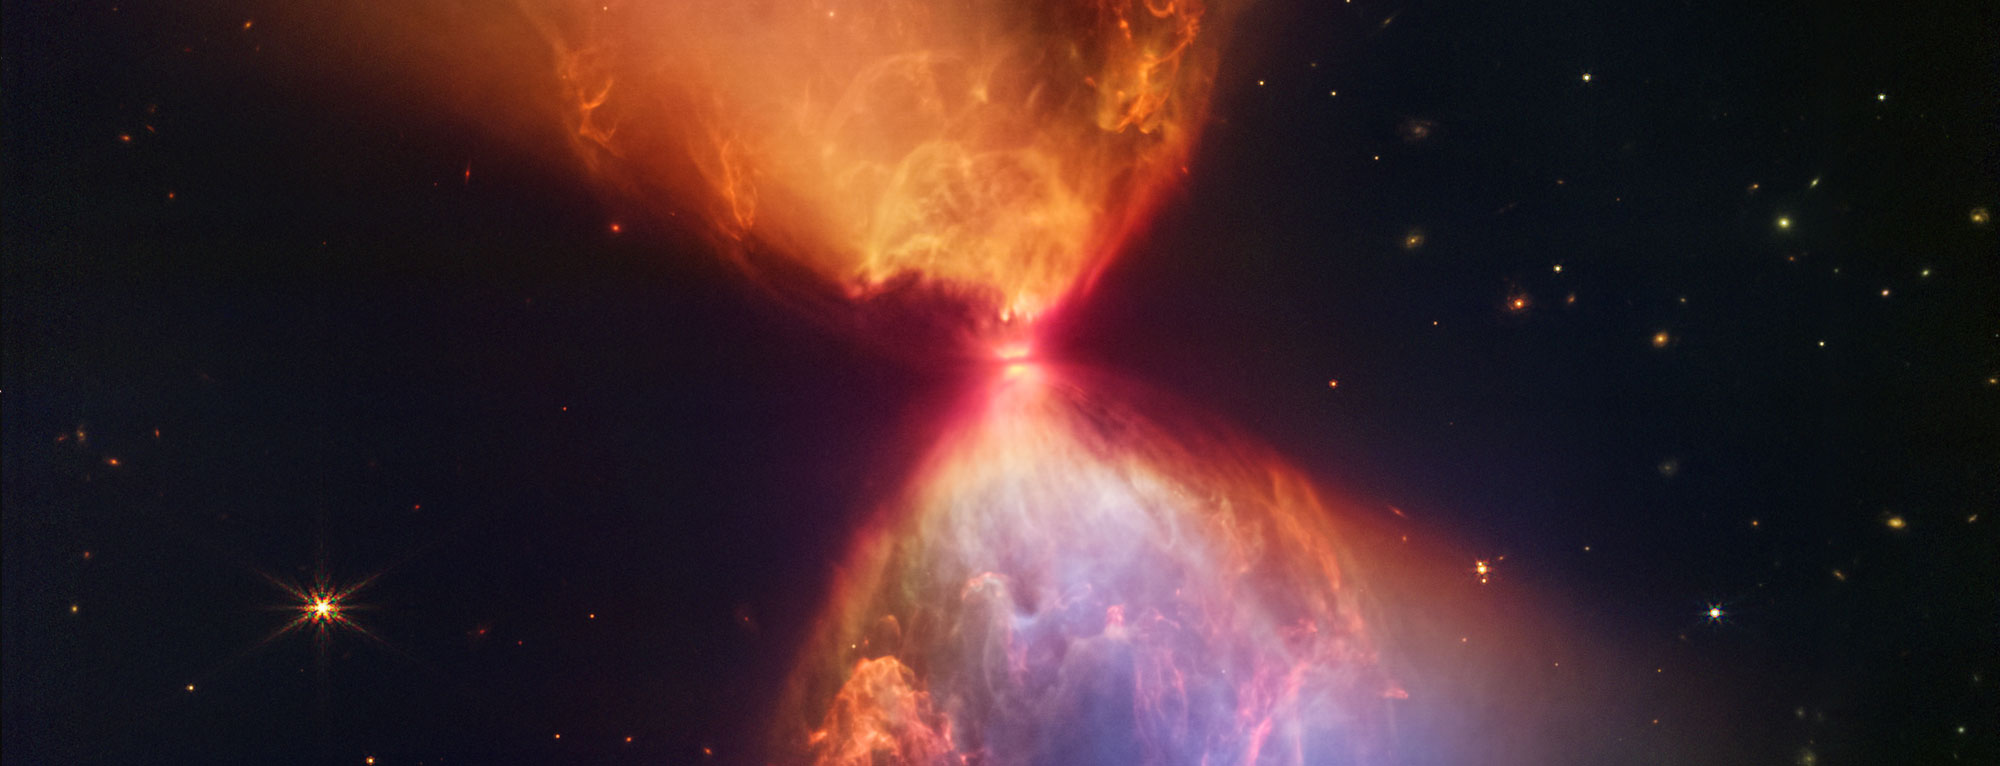 stars and clouds of gas in space